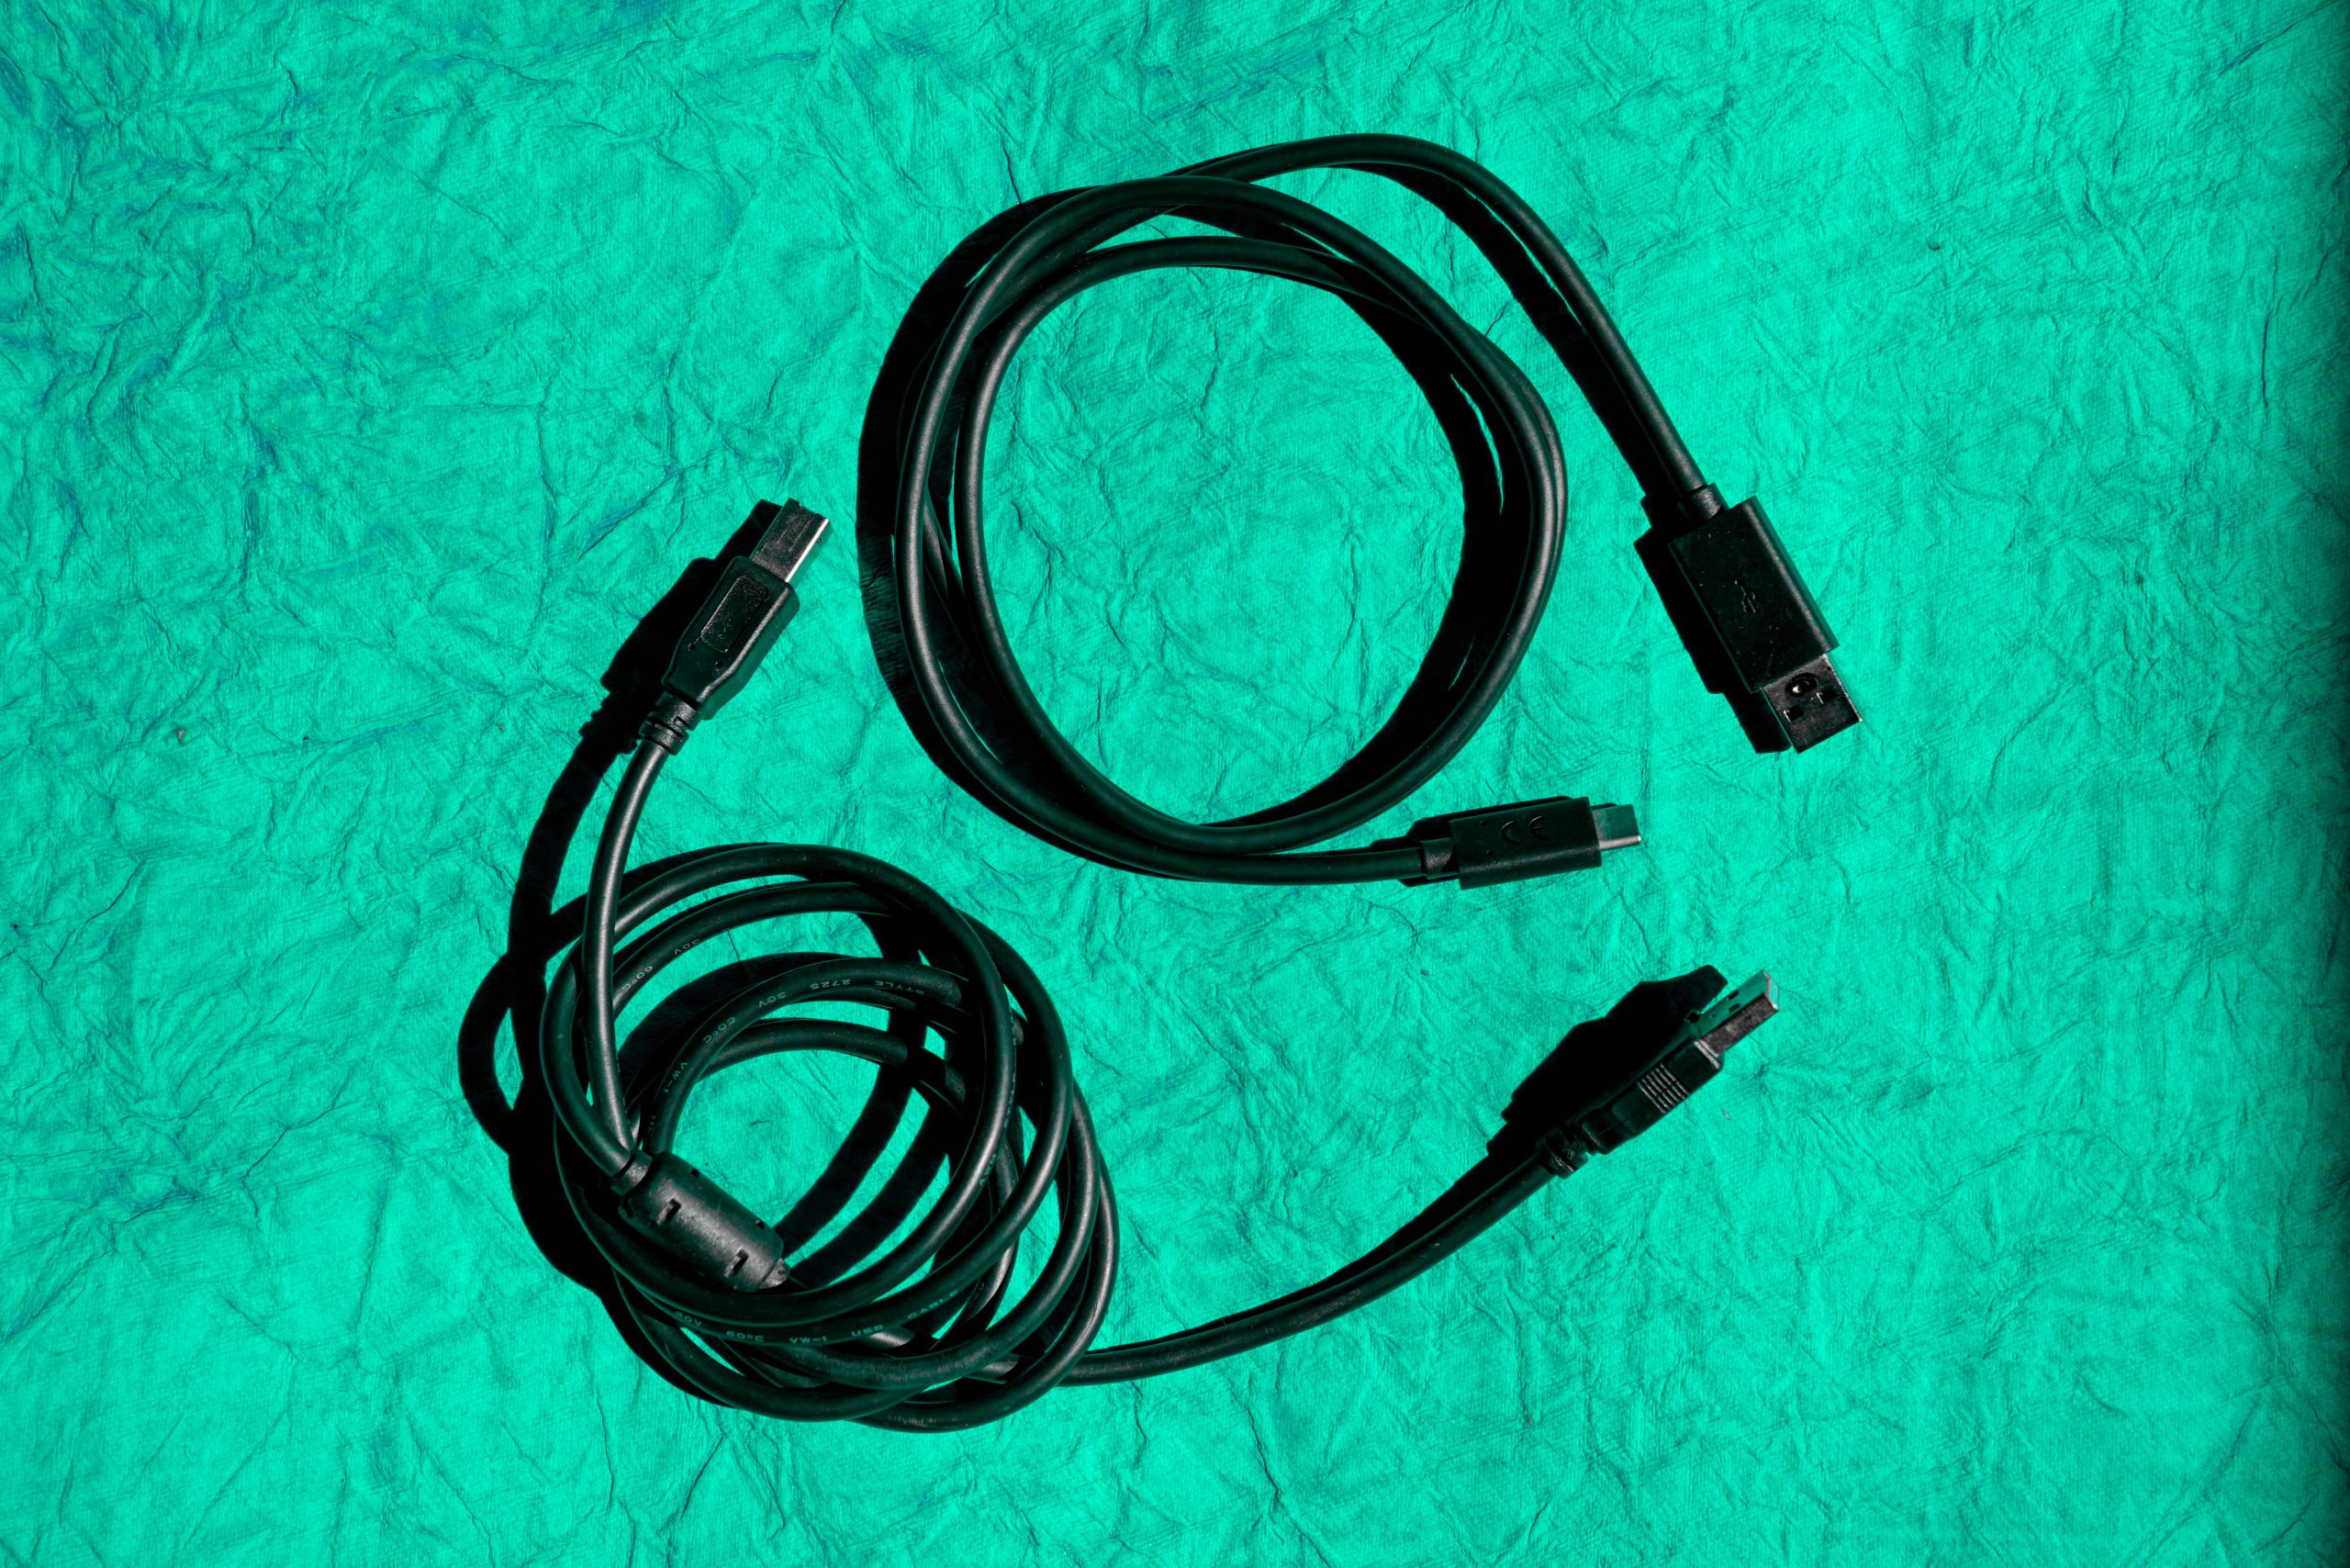 HDMI Cable on Green chart